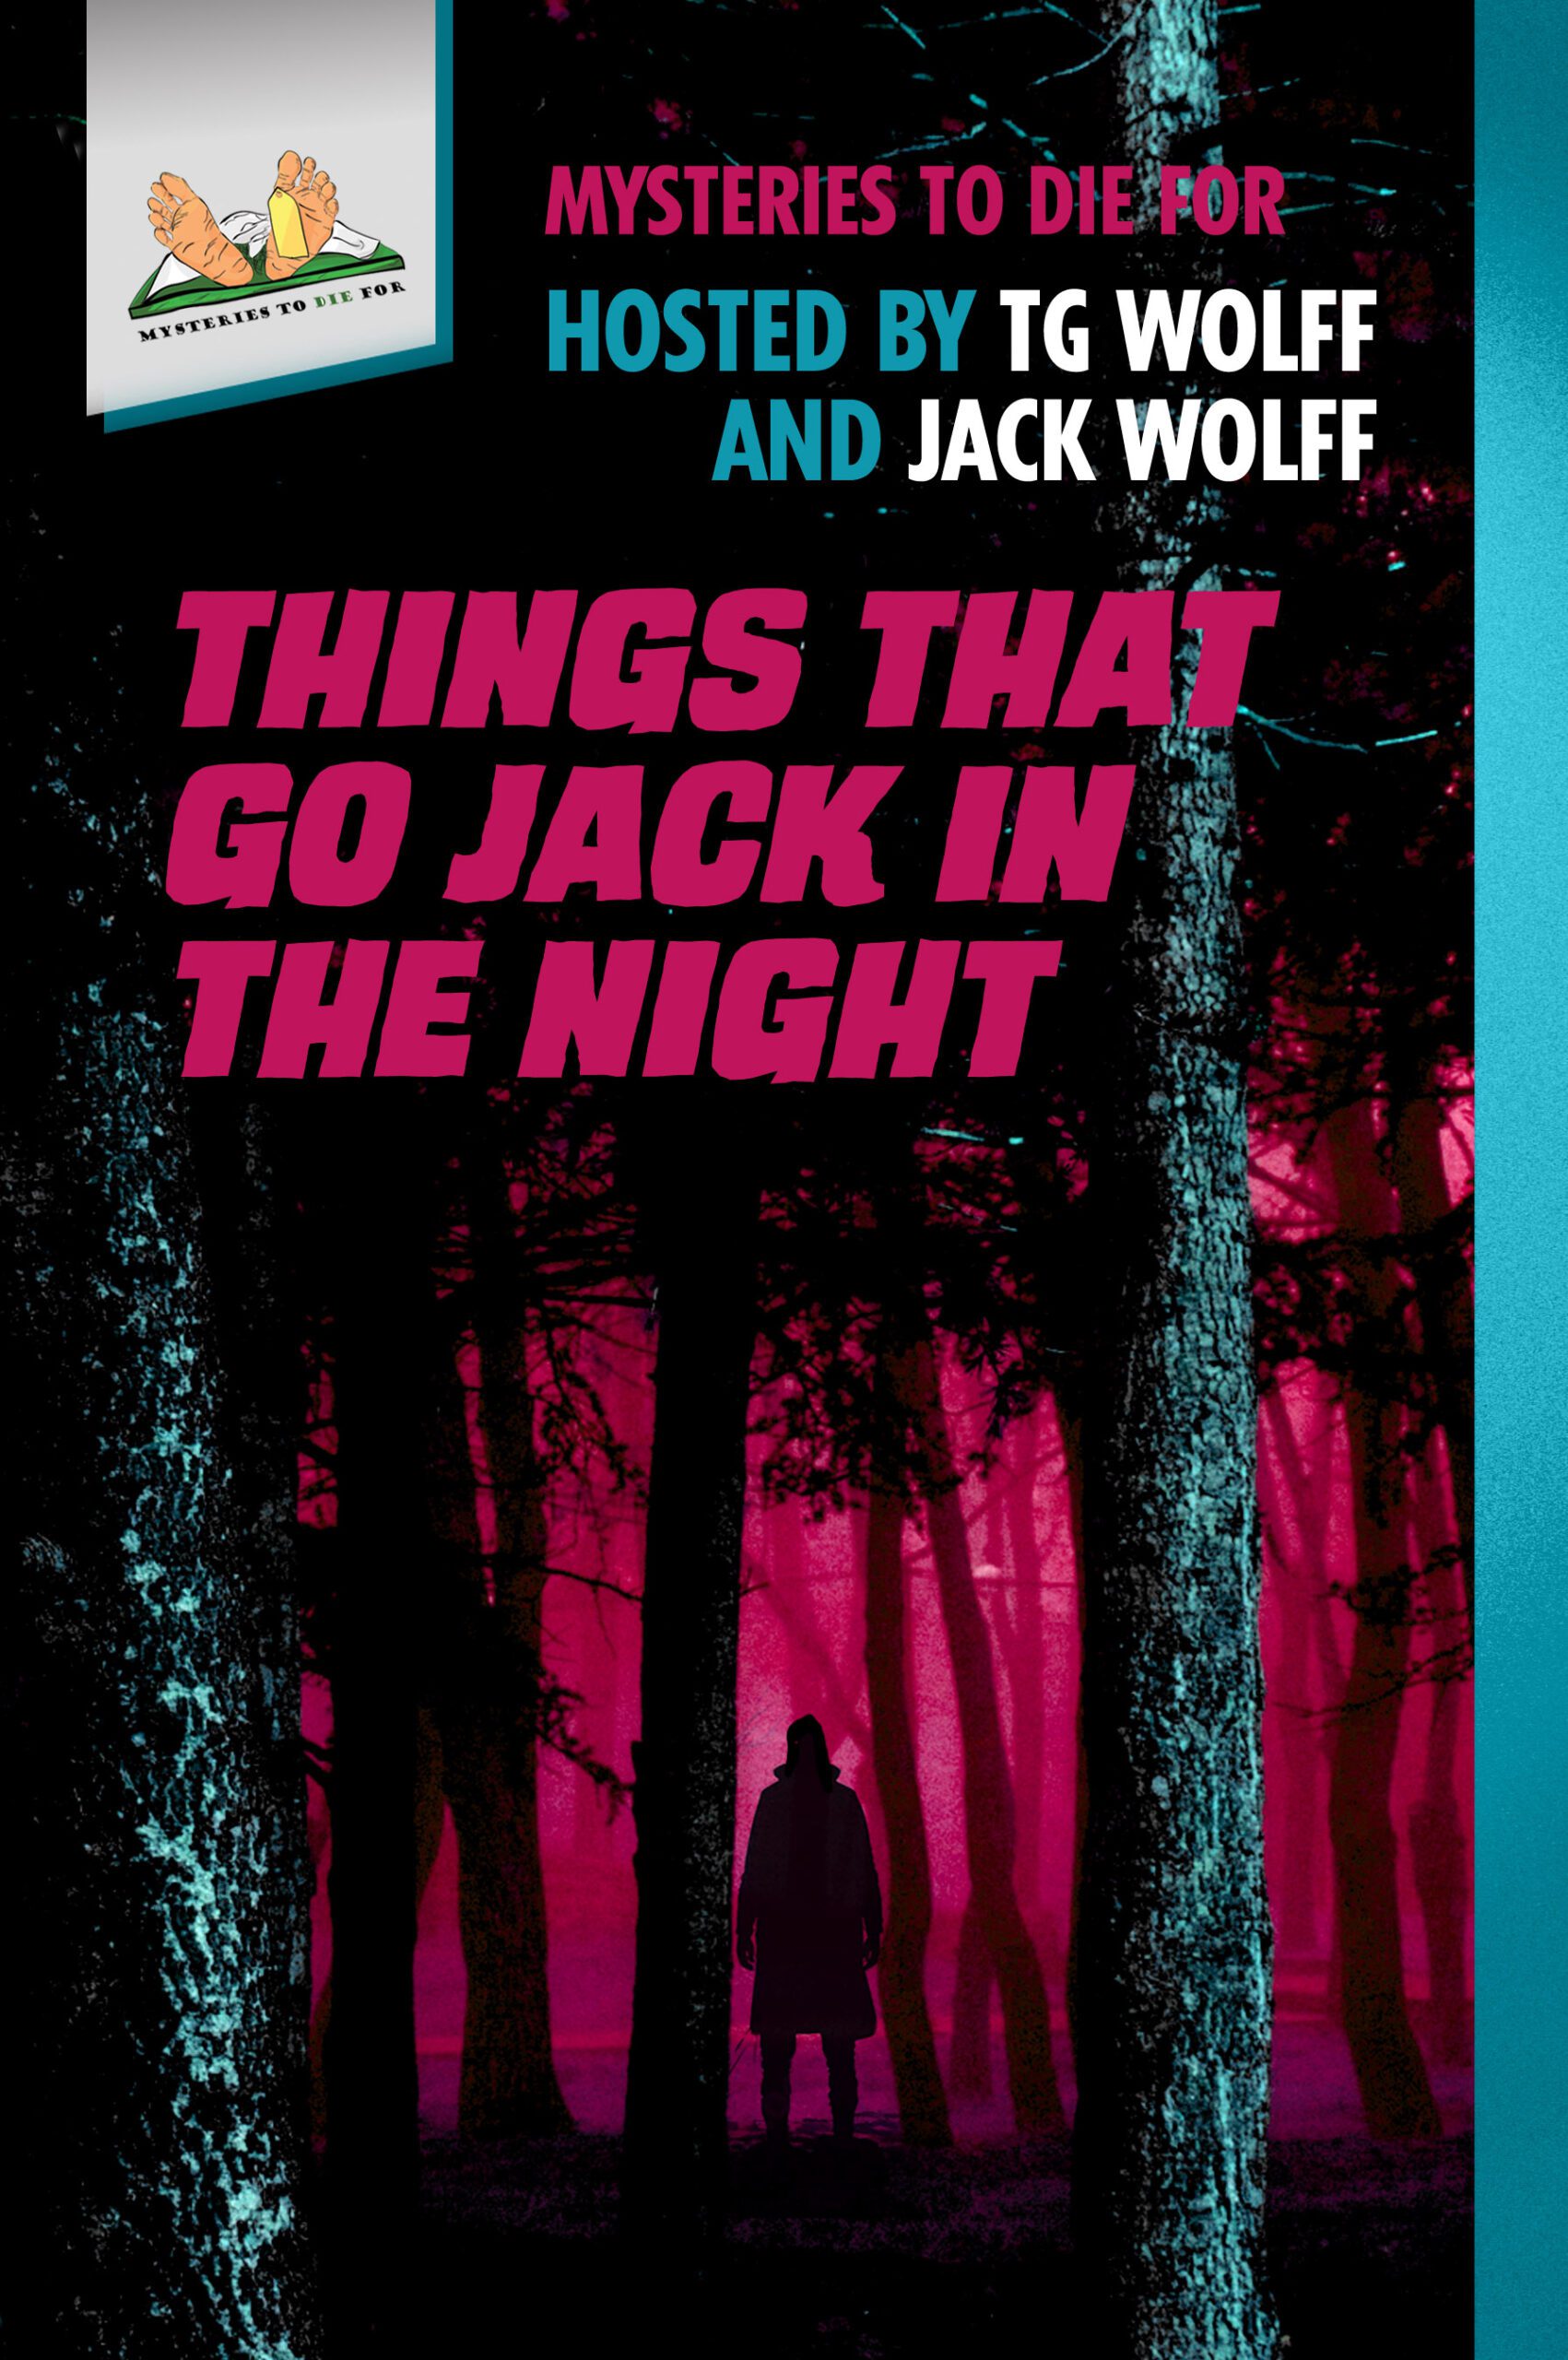 Things That Go Jack In The Night by TG Wolff